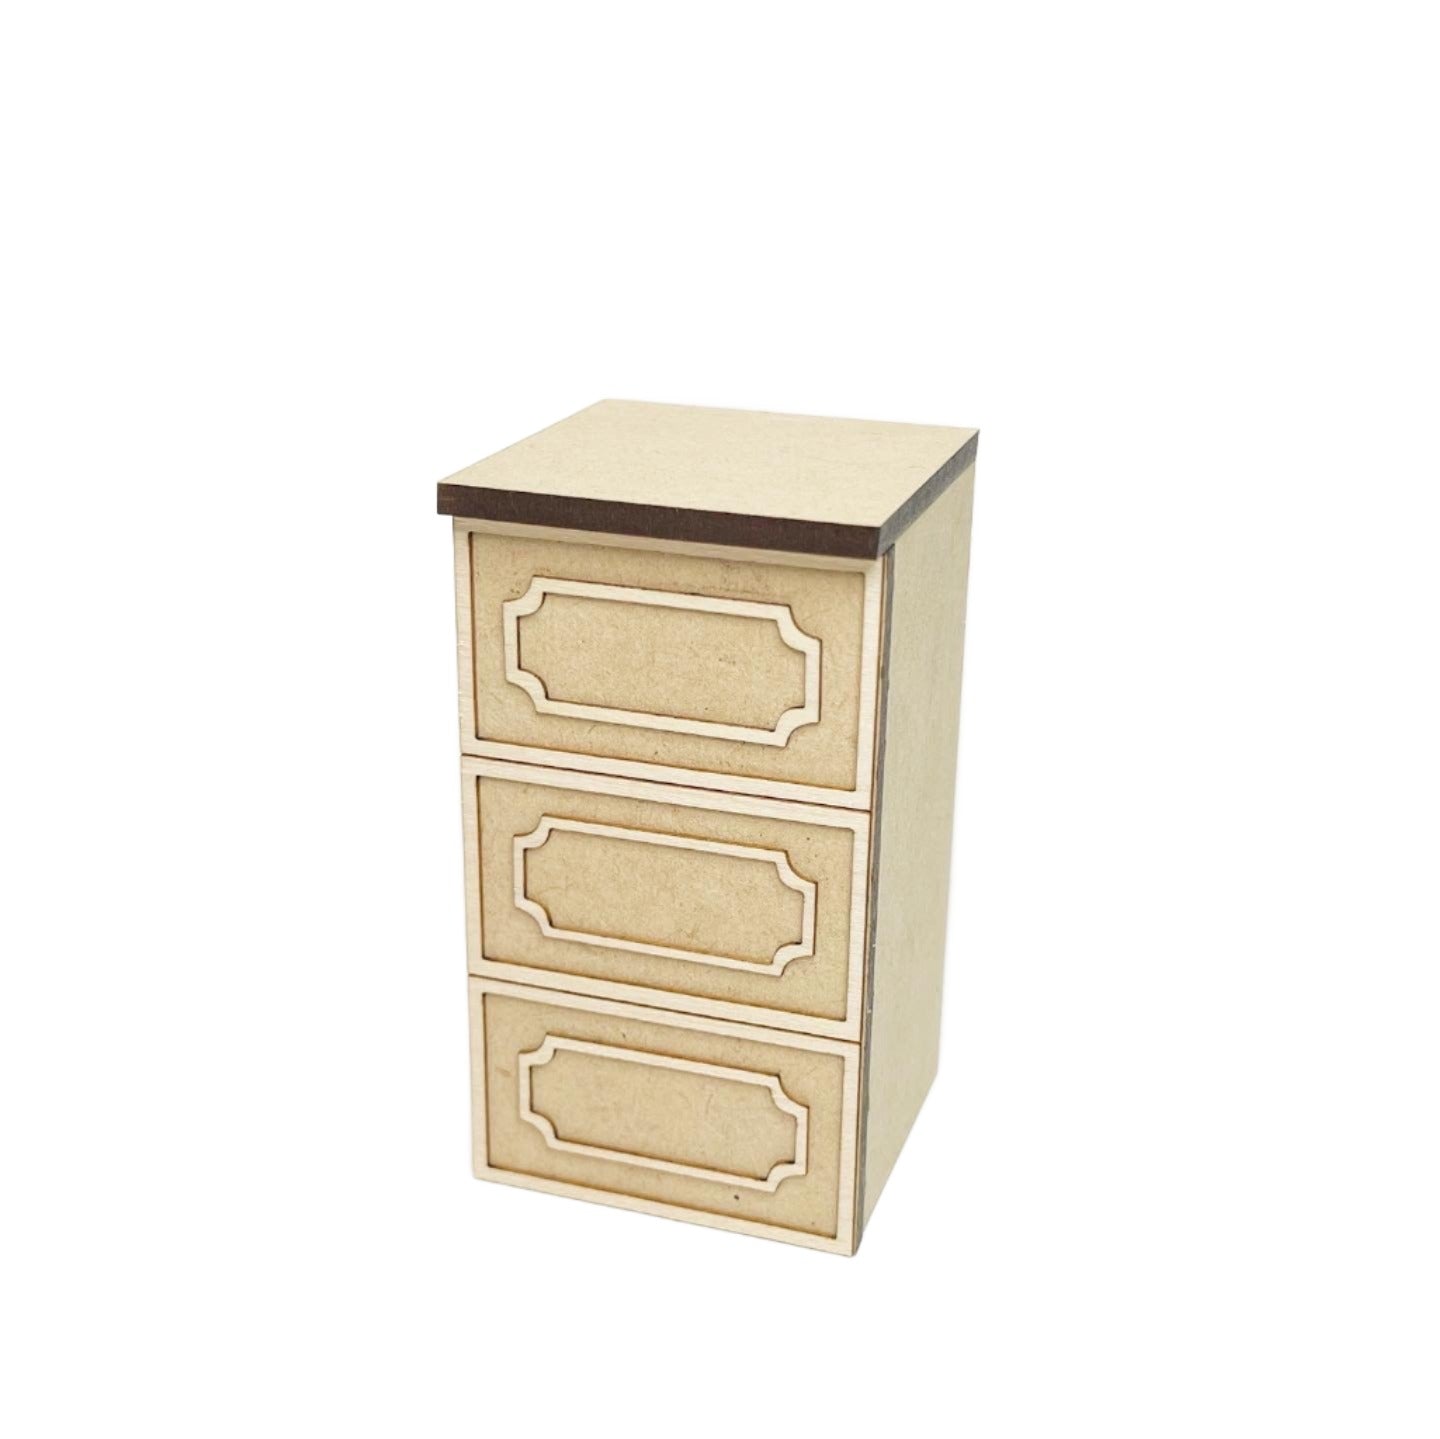 Single Lower Cabinet with 3 Drawers, French Country